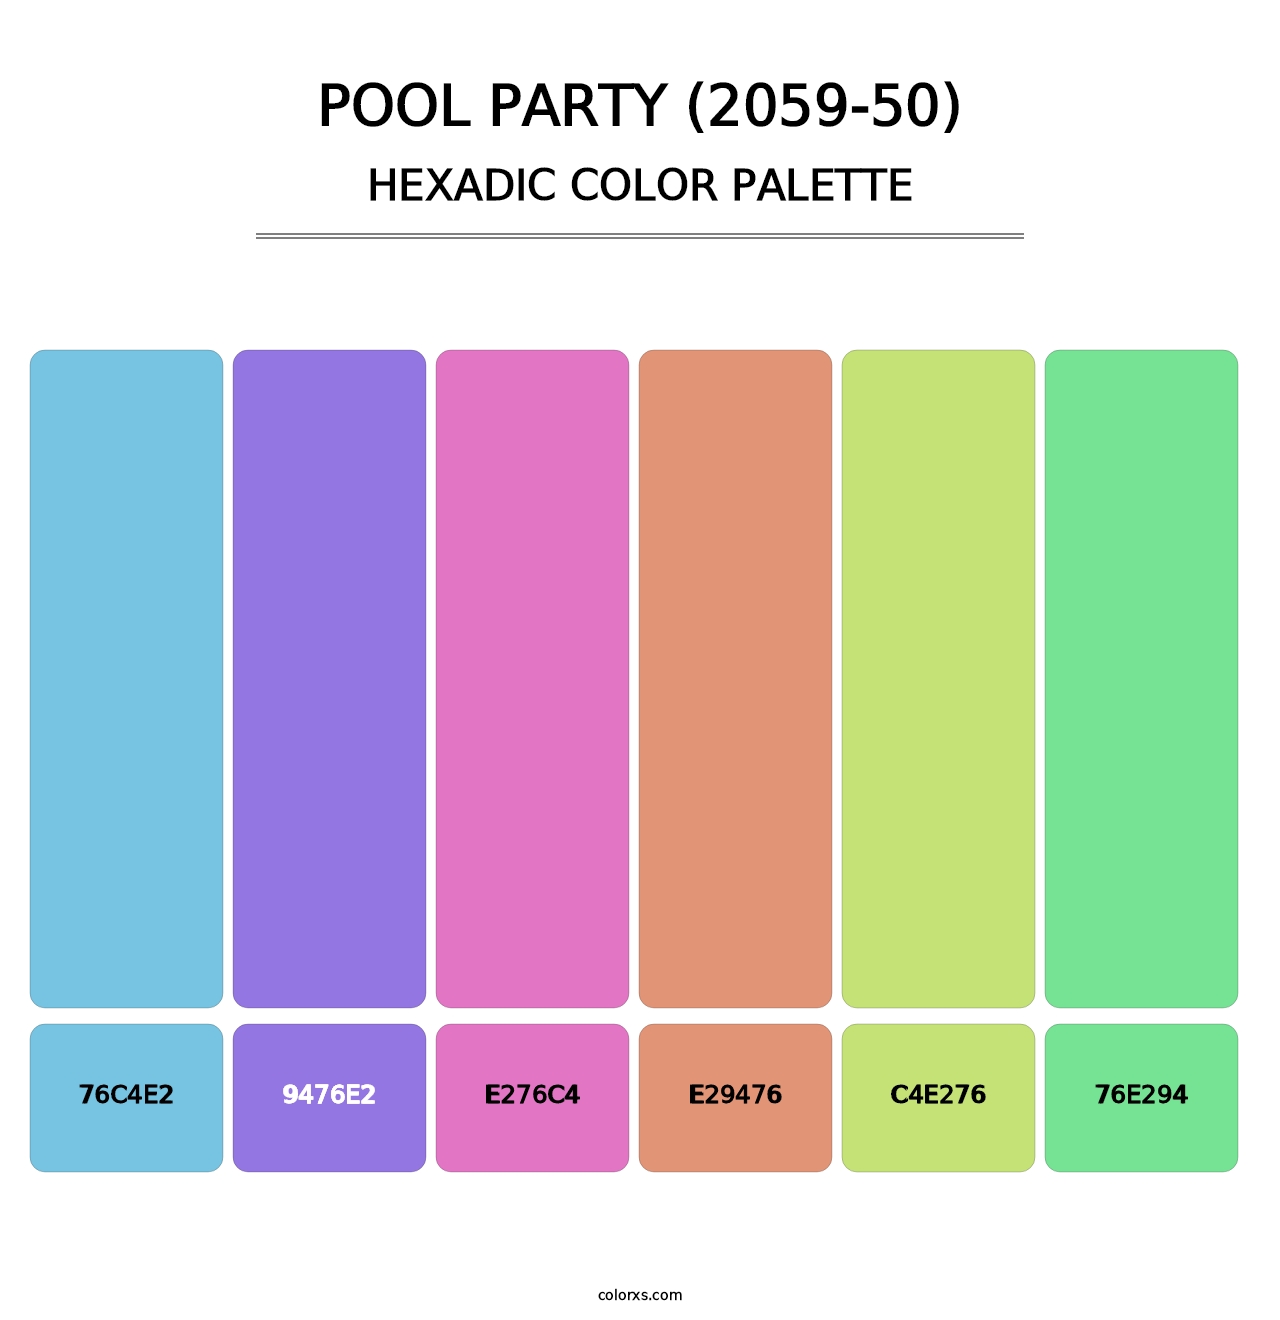 Pool Party (2059-50) - Hexadic Color Palette